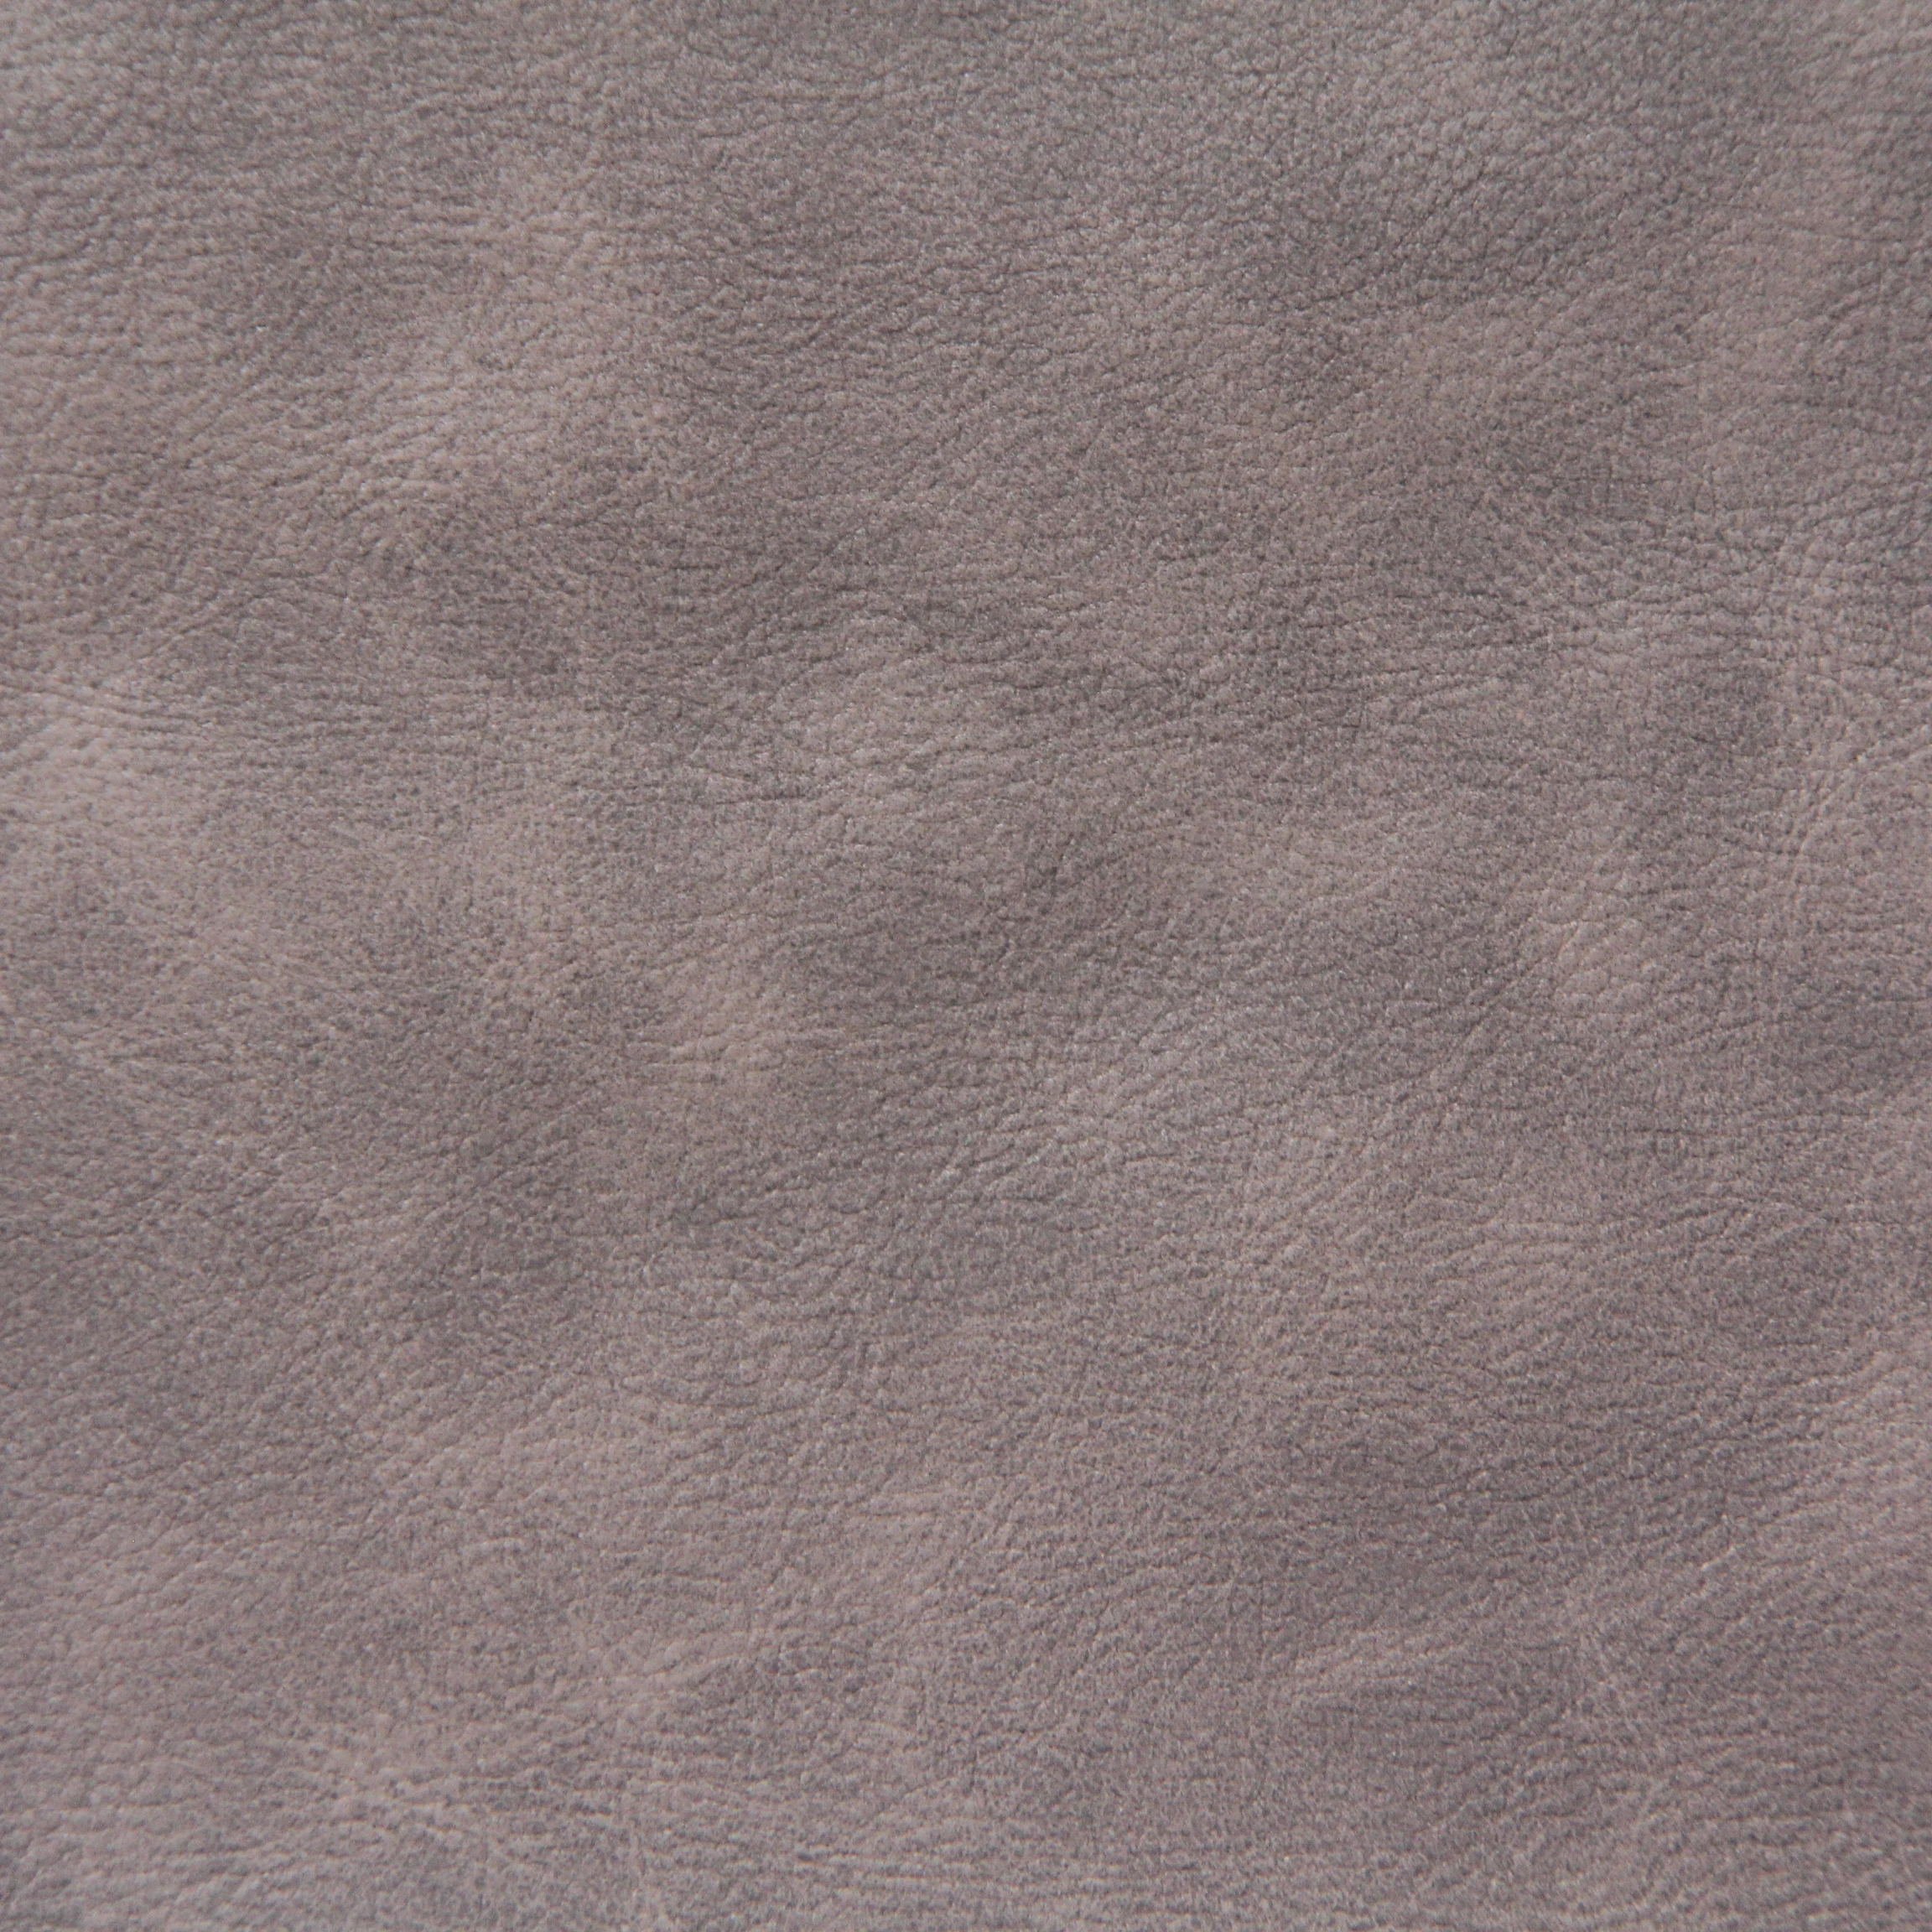 
Two-tone pvc furniture leather synthetic for upholstery 